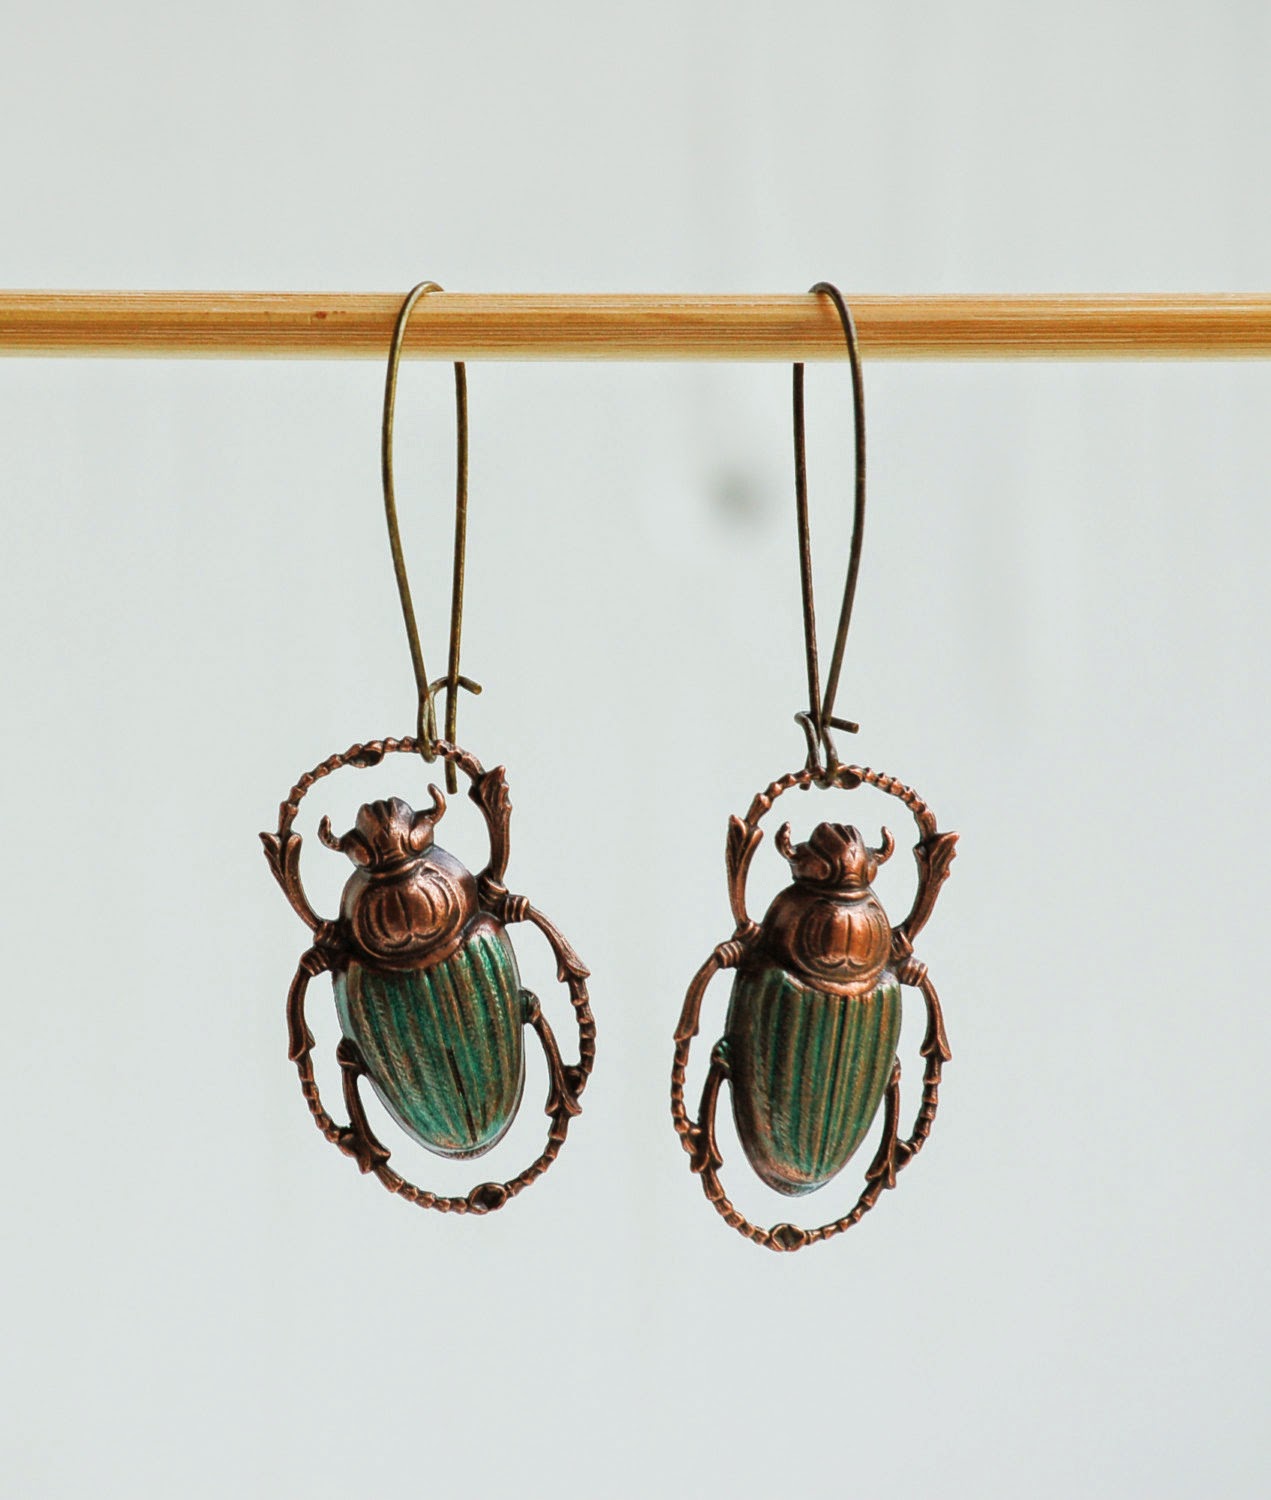 https://www.etsy.com/listing/199710893/steam-punk-green-beetle-earrings-nature?ref=shop_home_active_1&ga_search_query=beetle